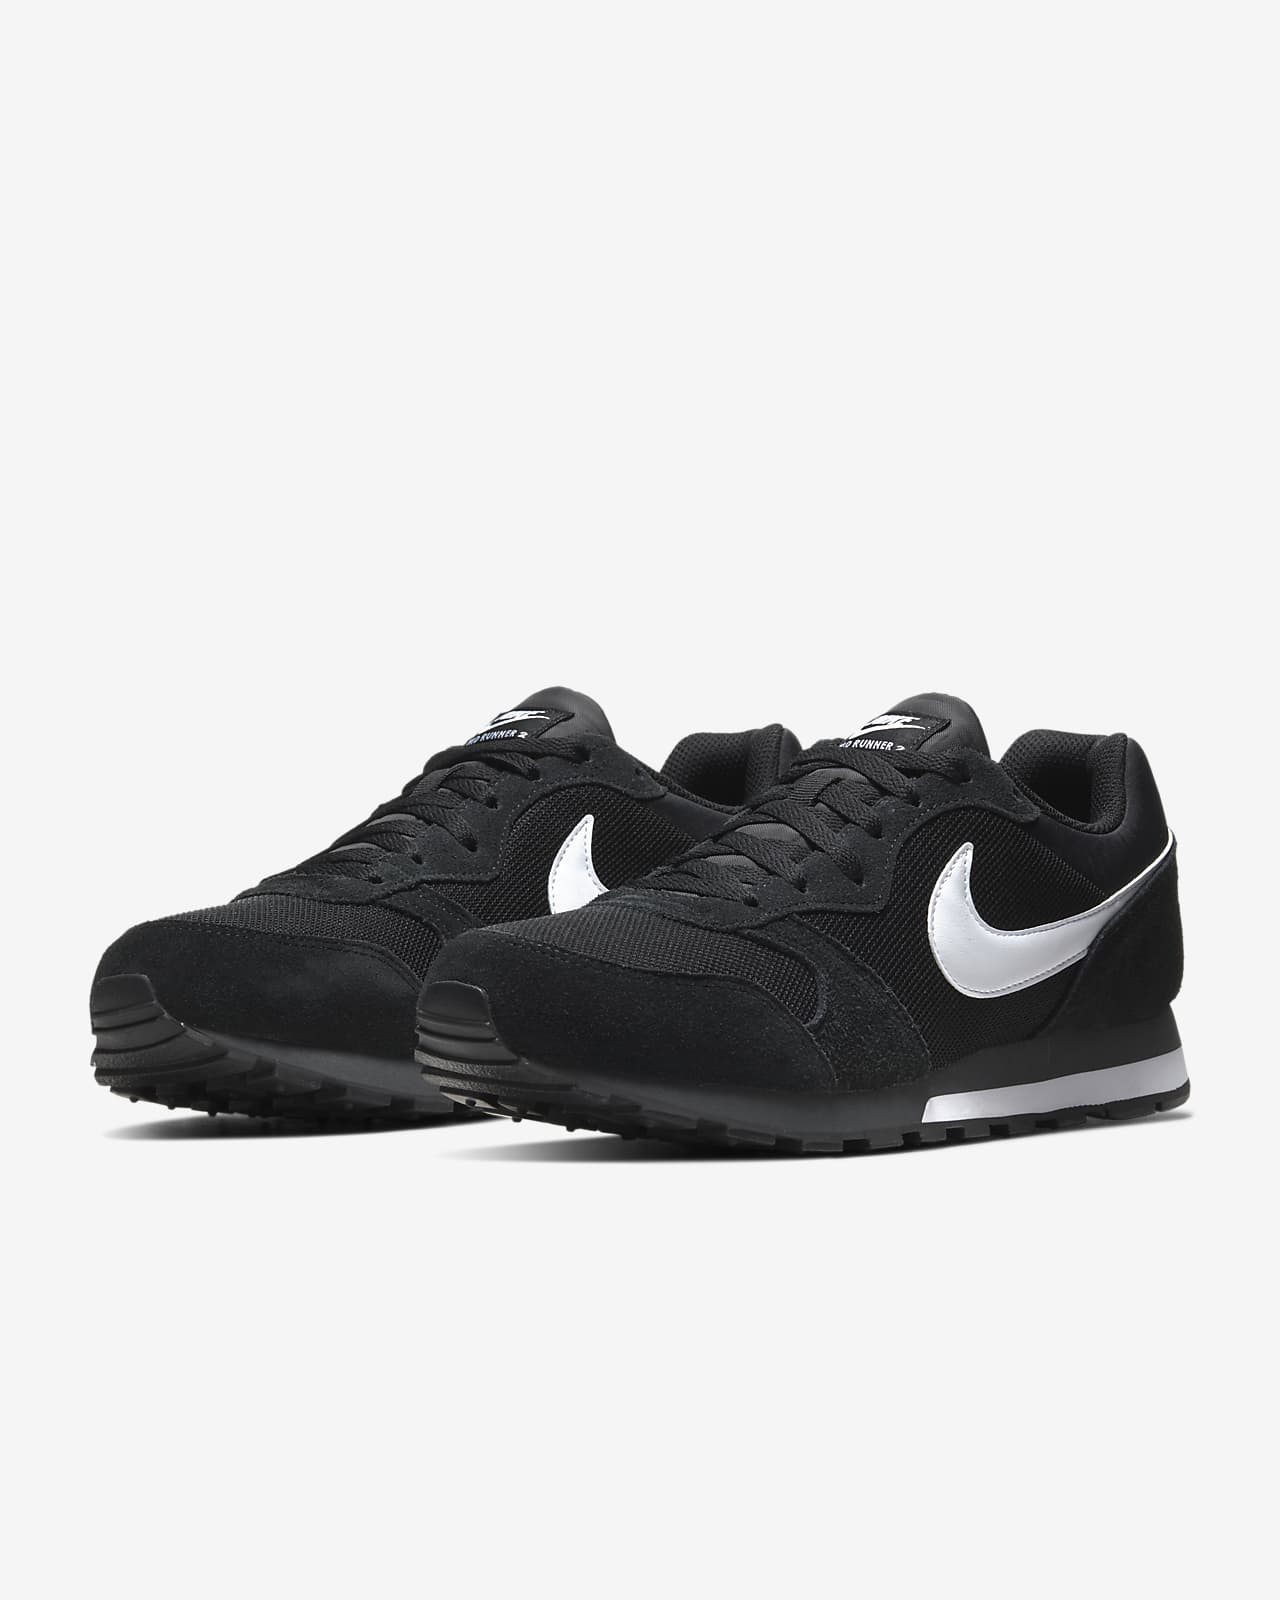 Nike Md Runner 2 Sale On Sale, UP TO 53% OFF